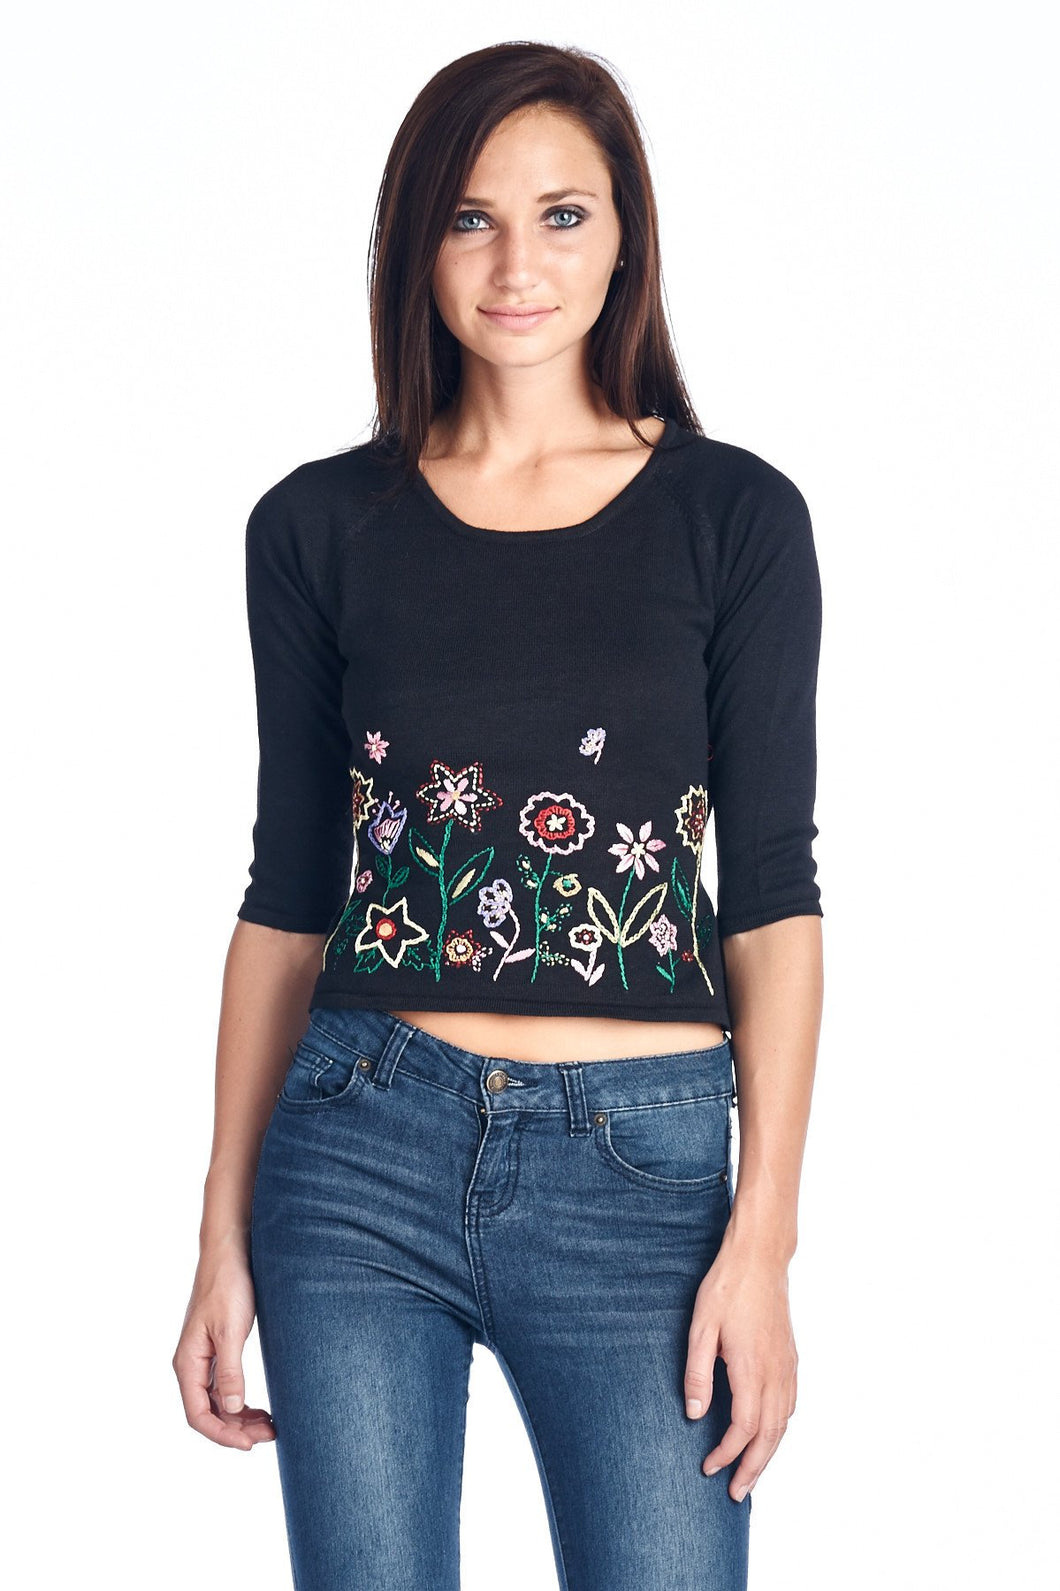 Bonnie & Bill Floral Embroidered Tie-Back Crop Sweater - WholesaleClothingDeals - 1